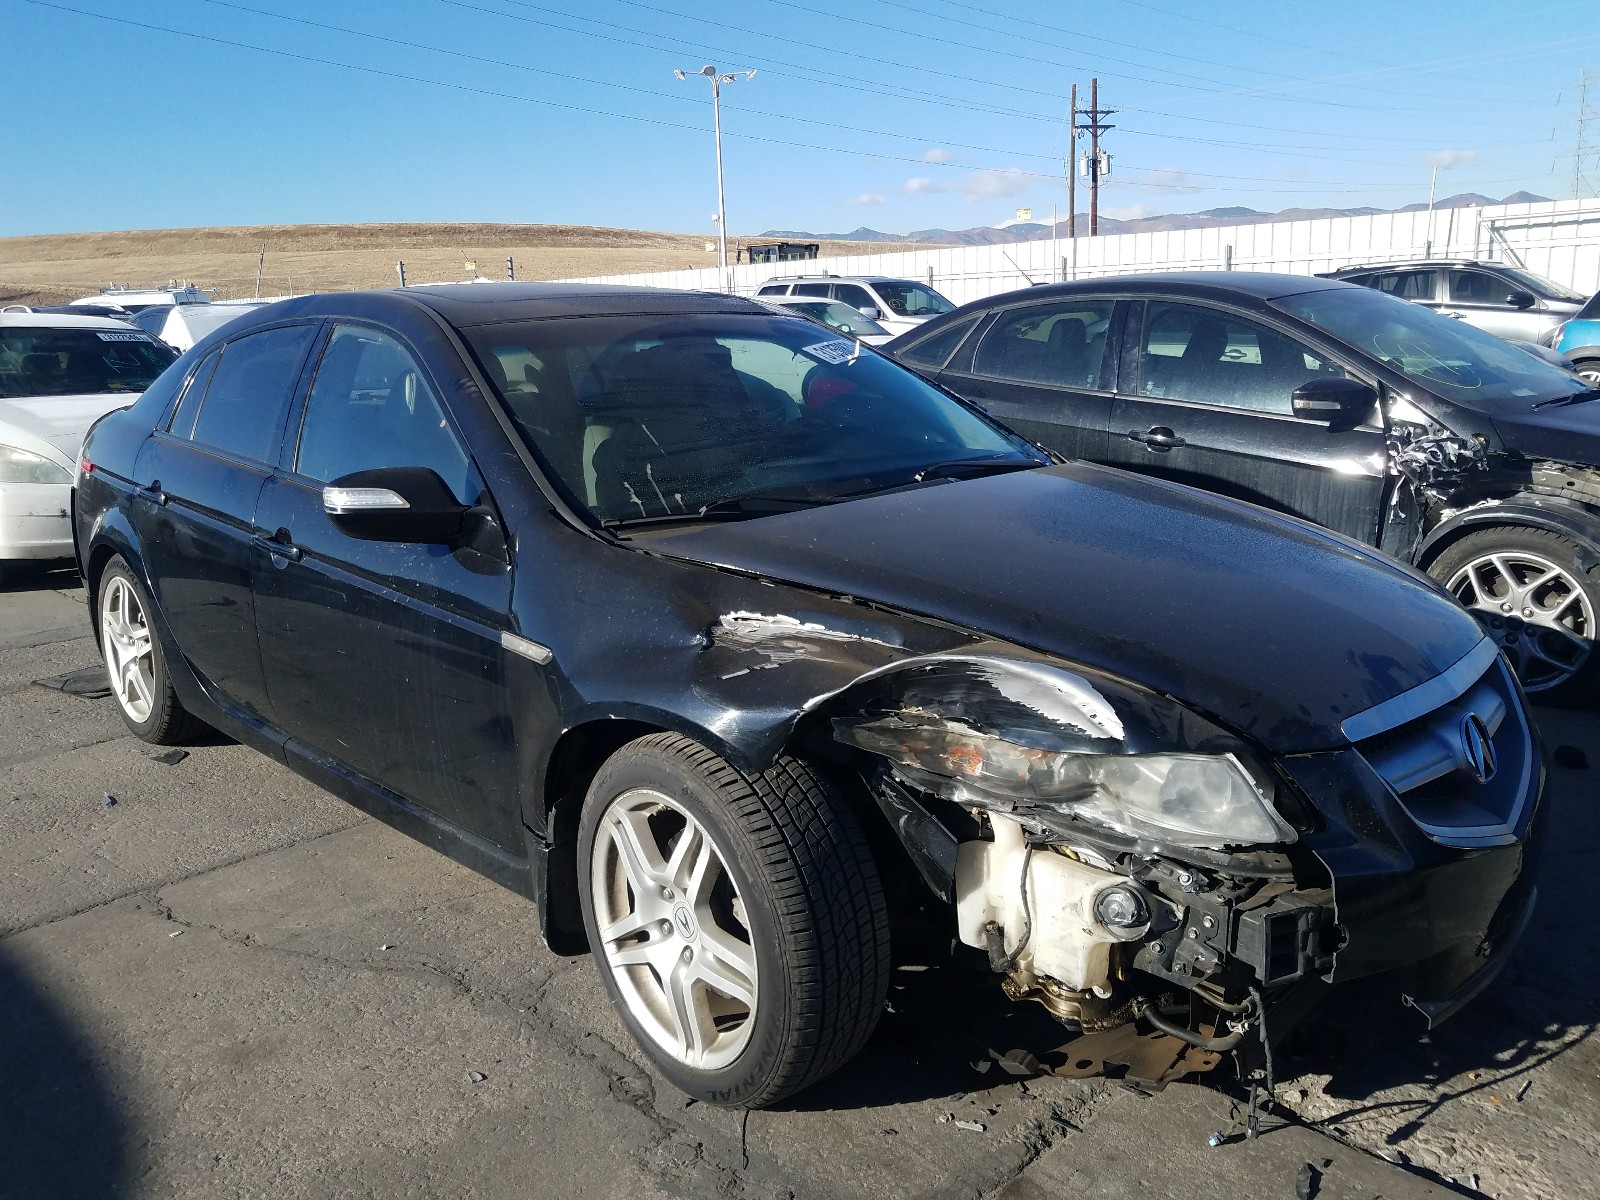 vin: 19UUA66267A018597 19UUA66267A018597 2007 acura tl 3200 for Sale in US CO